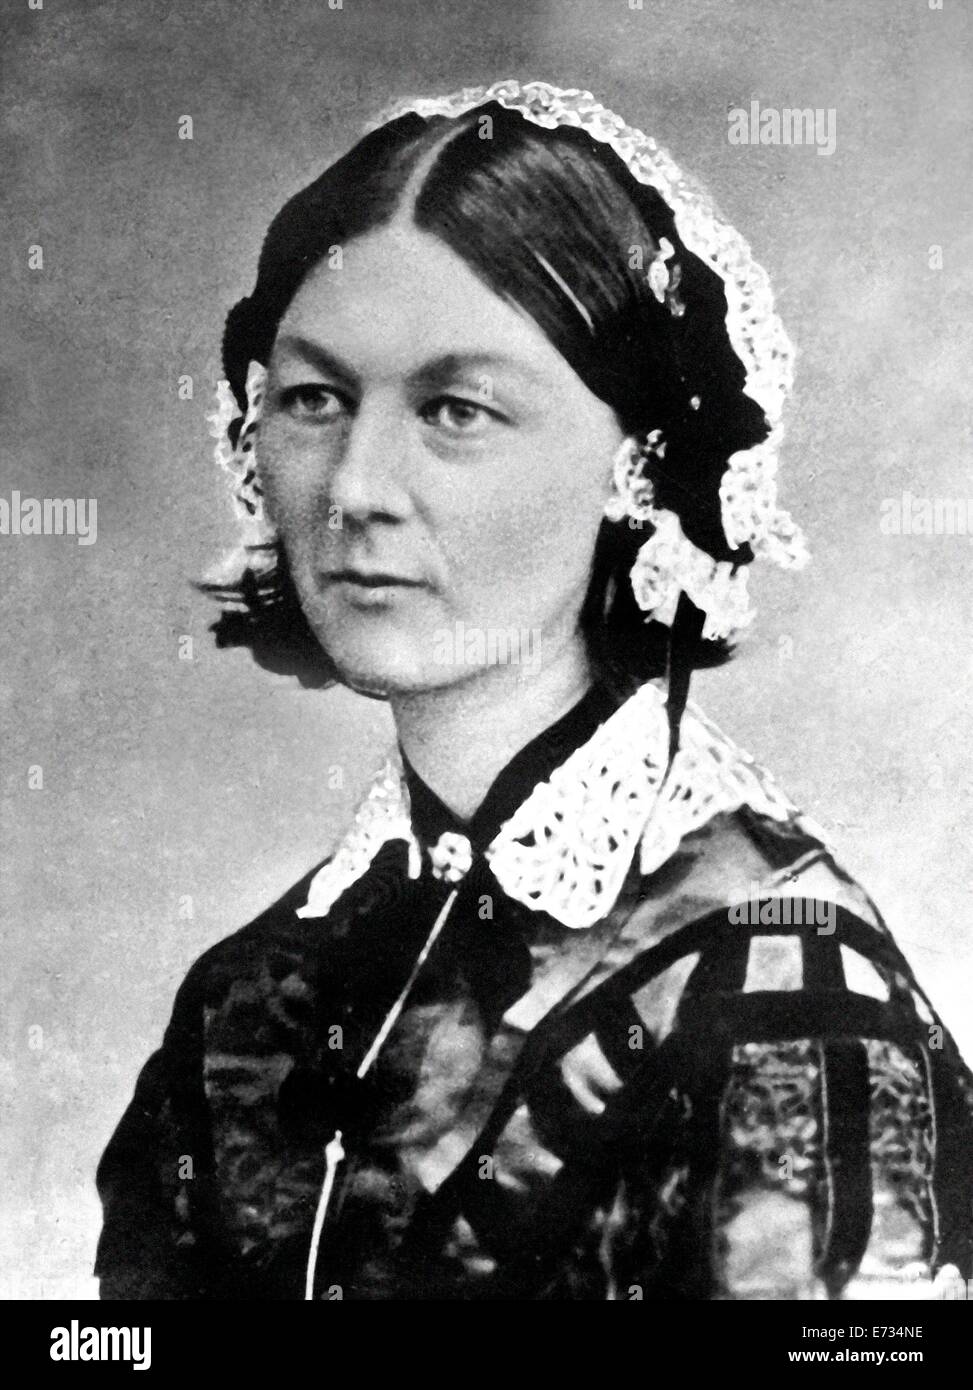 Florence Nightingale is famous for her nursing work during the Crimean War (1854 - 56).  From the archives of Press Portrait Service (formerly Press Portrait Bureau) Stock Photo